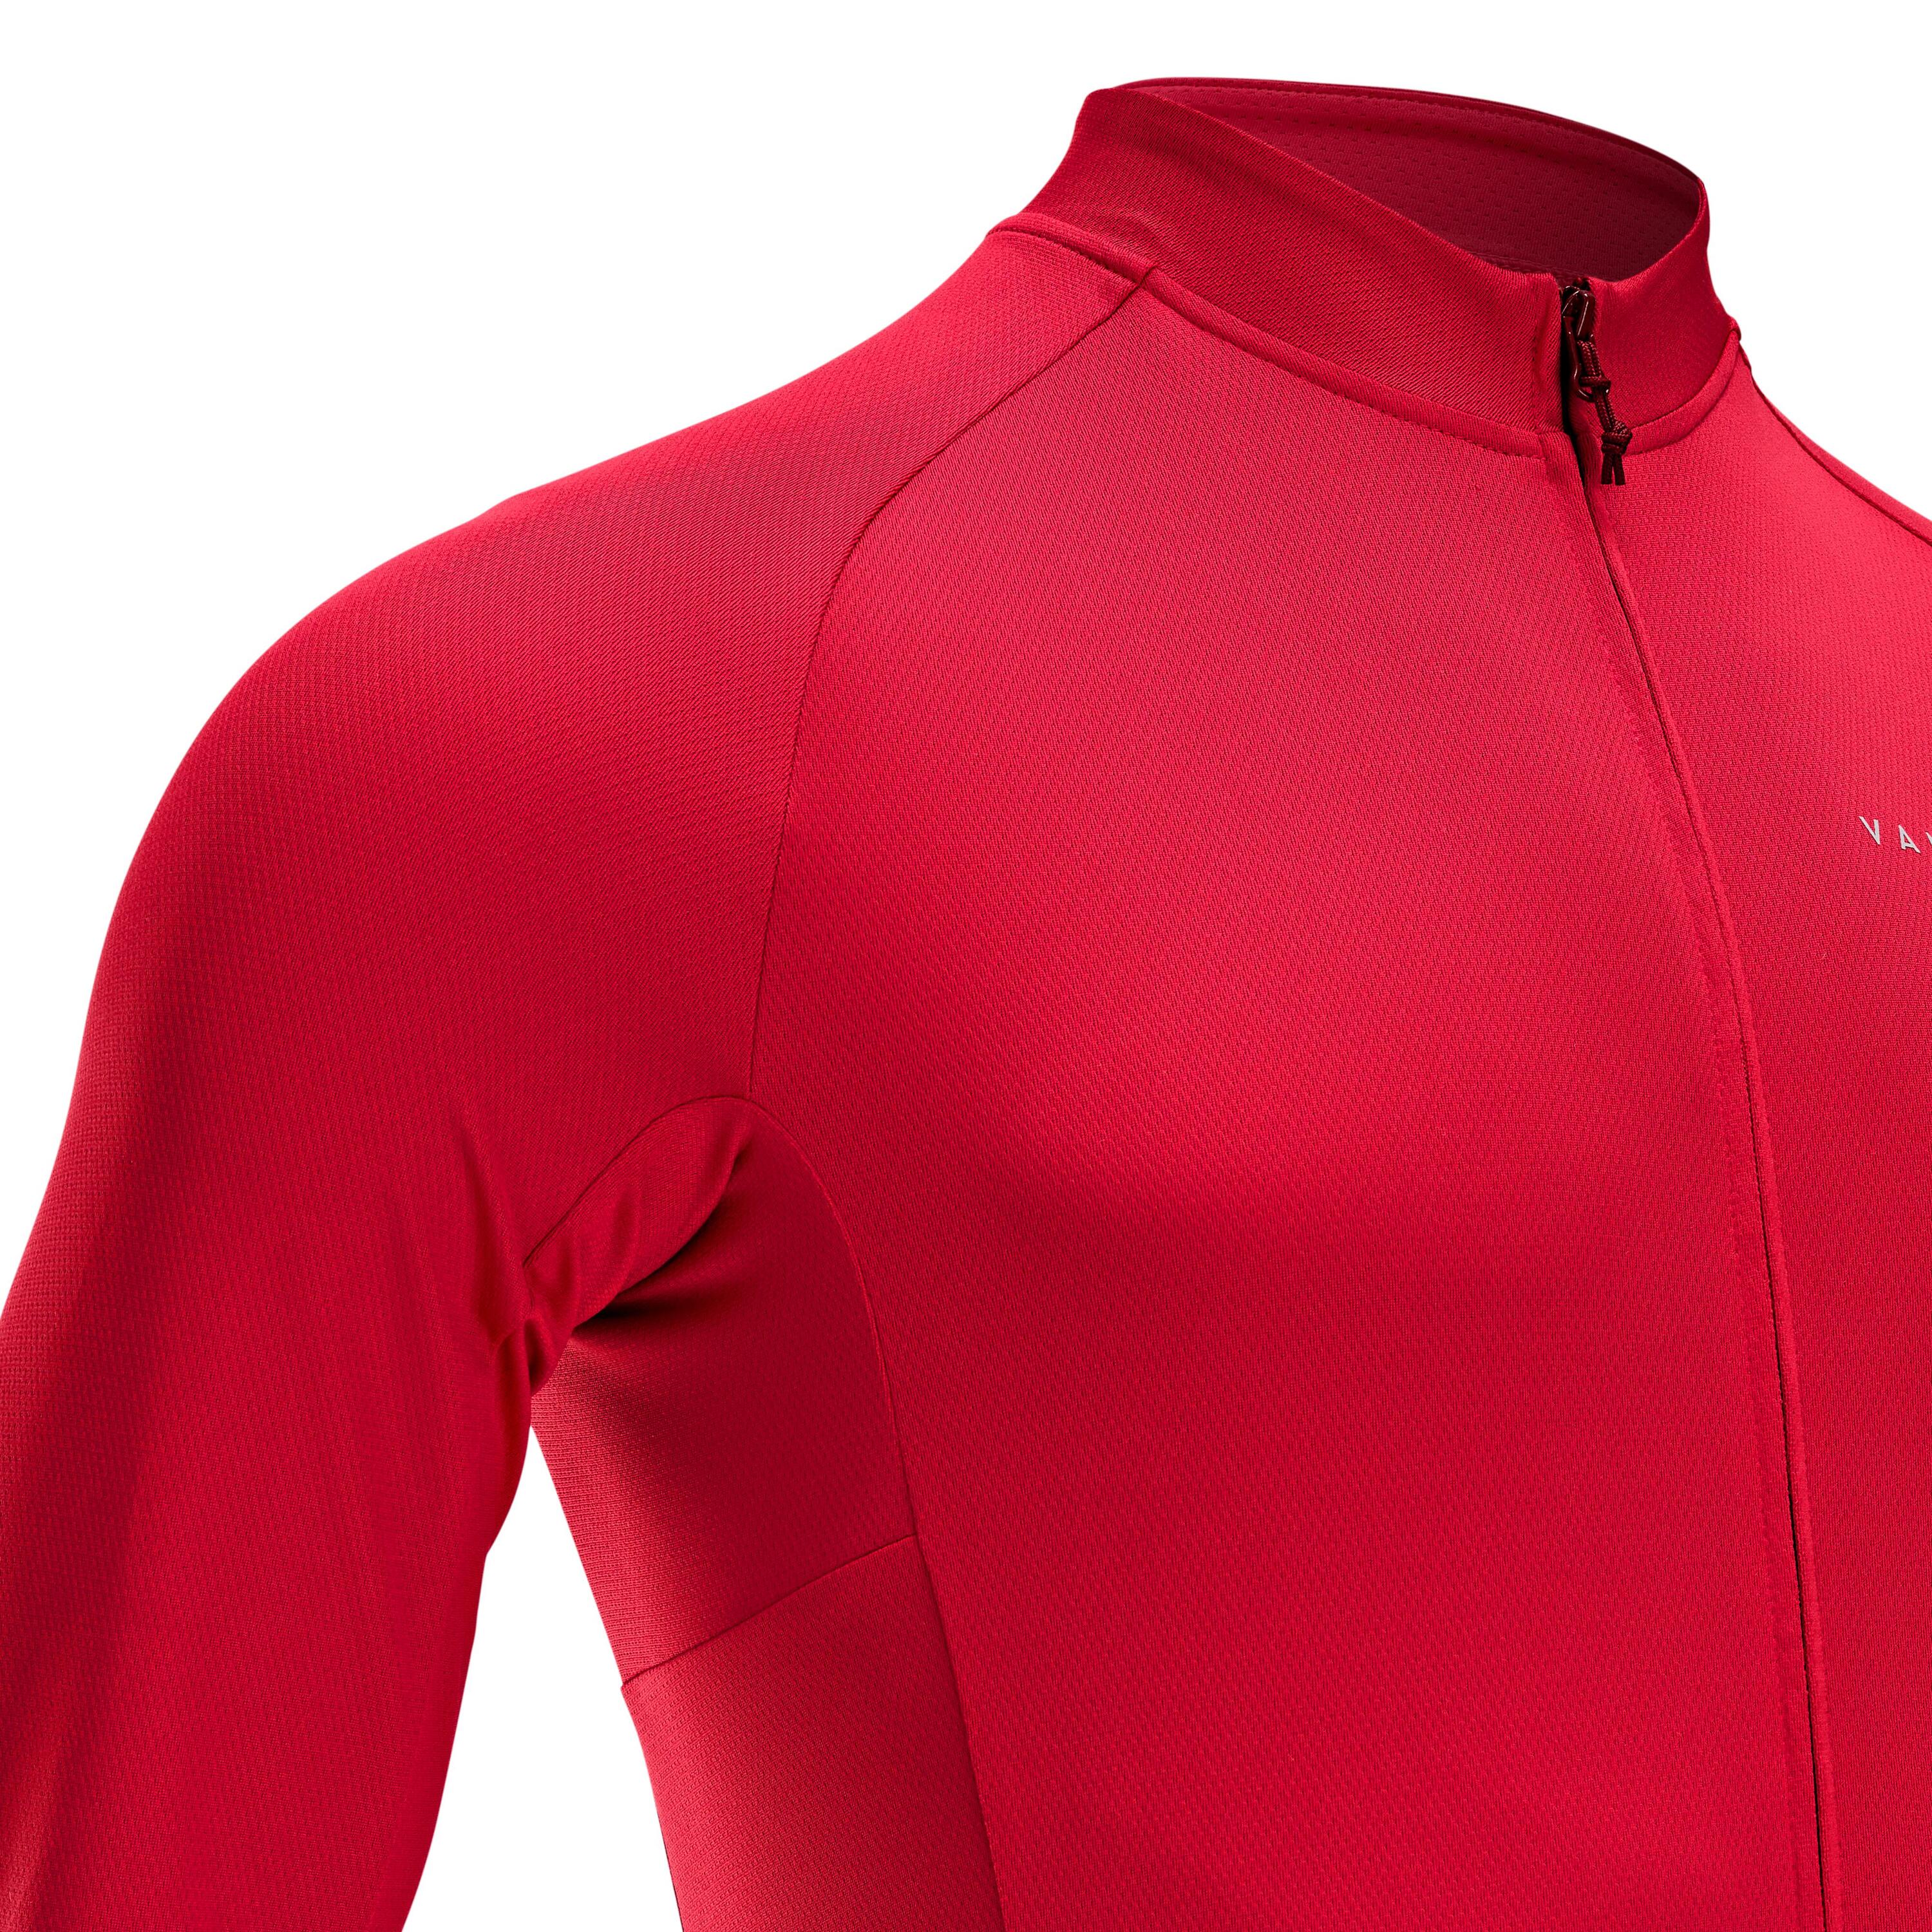 Men's Anti-UV Long-Sleeved Road Cycling Summer Jersey RC100 - Red 4/7